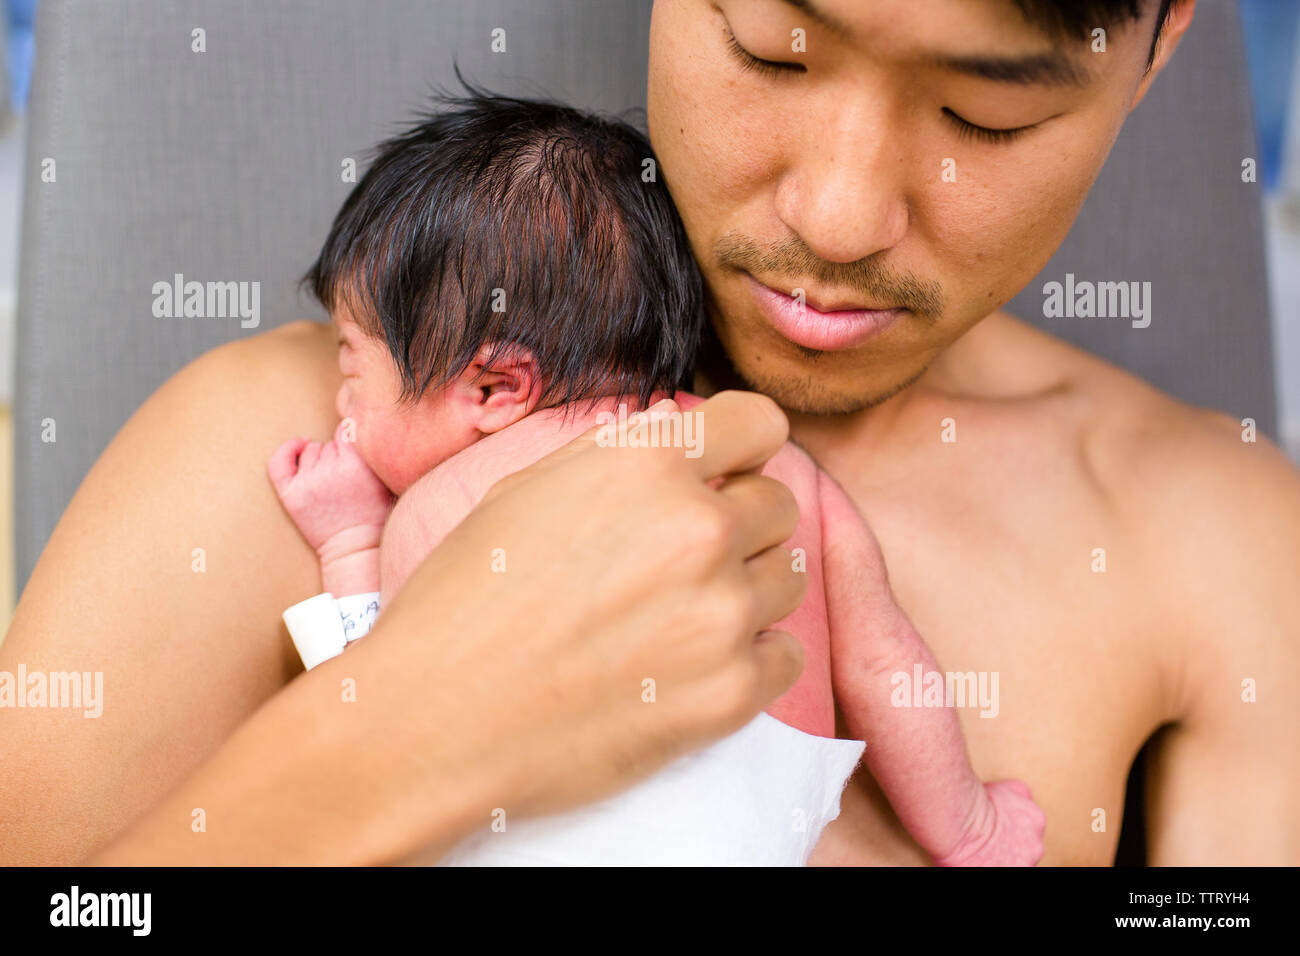 a new father rests peacefully skin-to-skin with his newborn baby girl Stock Photo